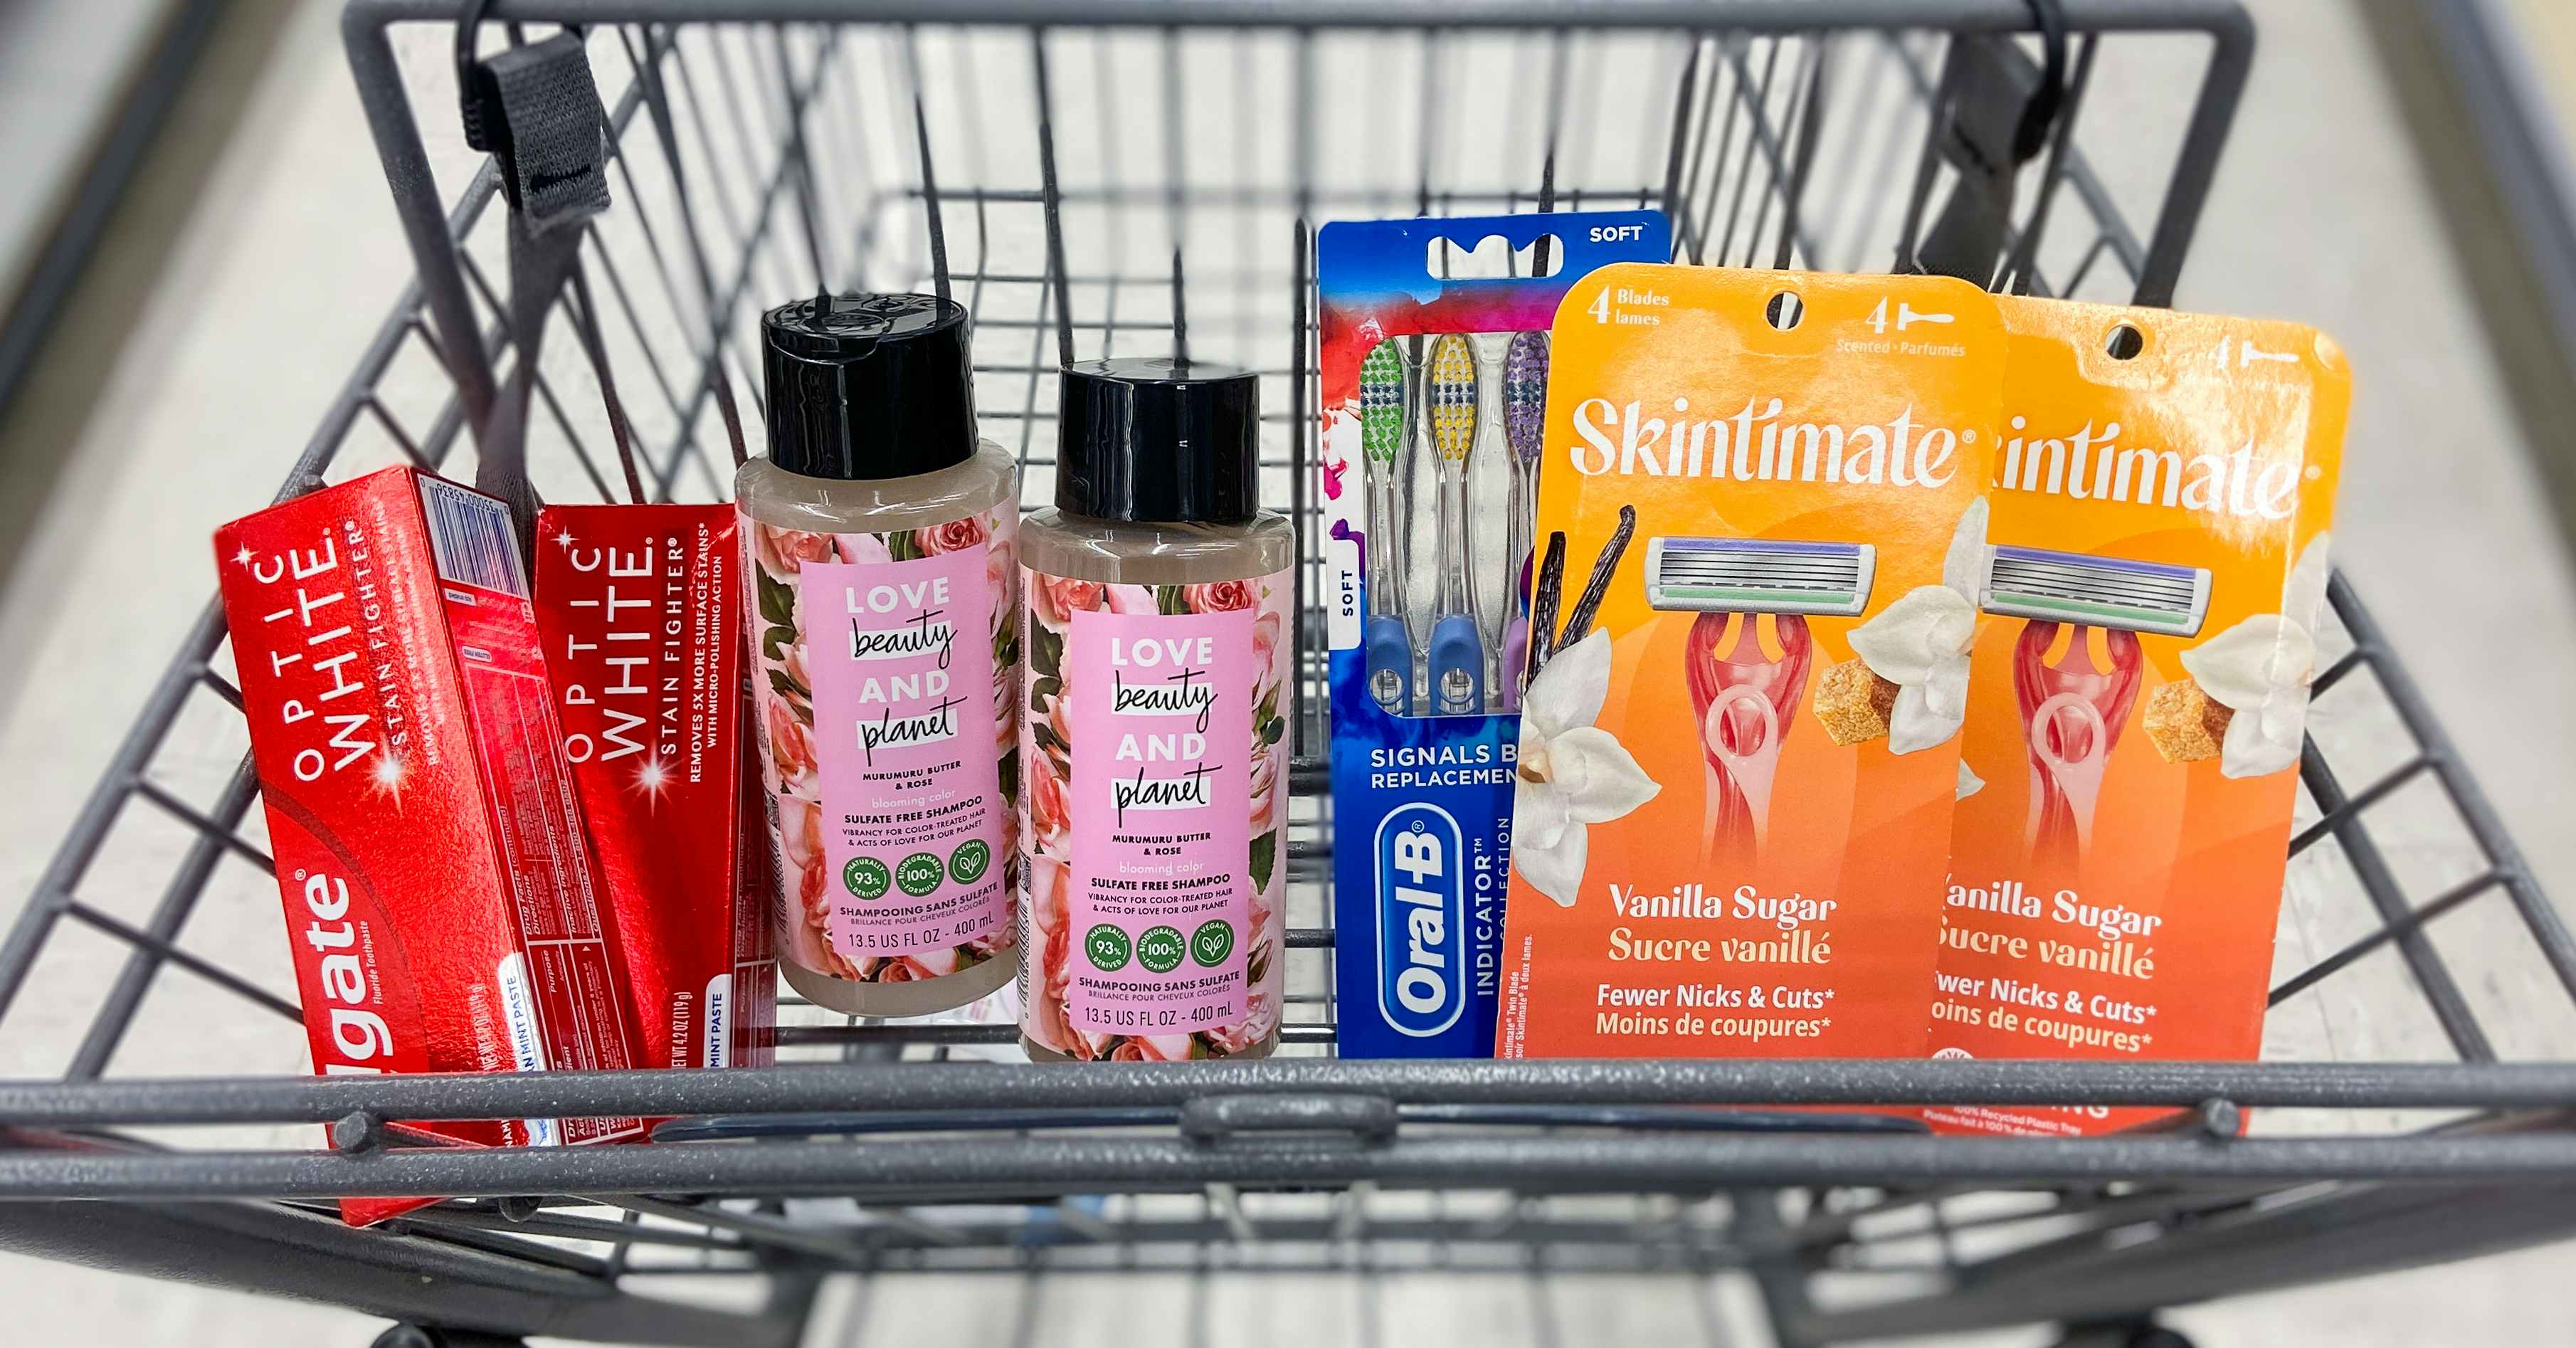 a cart with oral-b toothbrushes, skintimate razors, love beauty and planet hair care, and colgate toothpaste